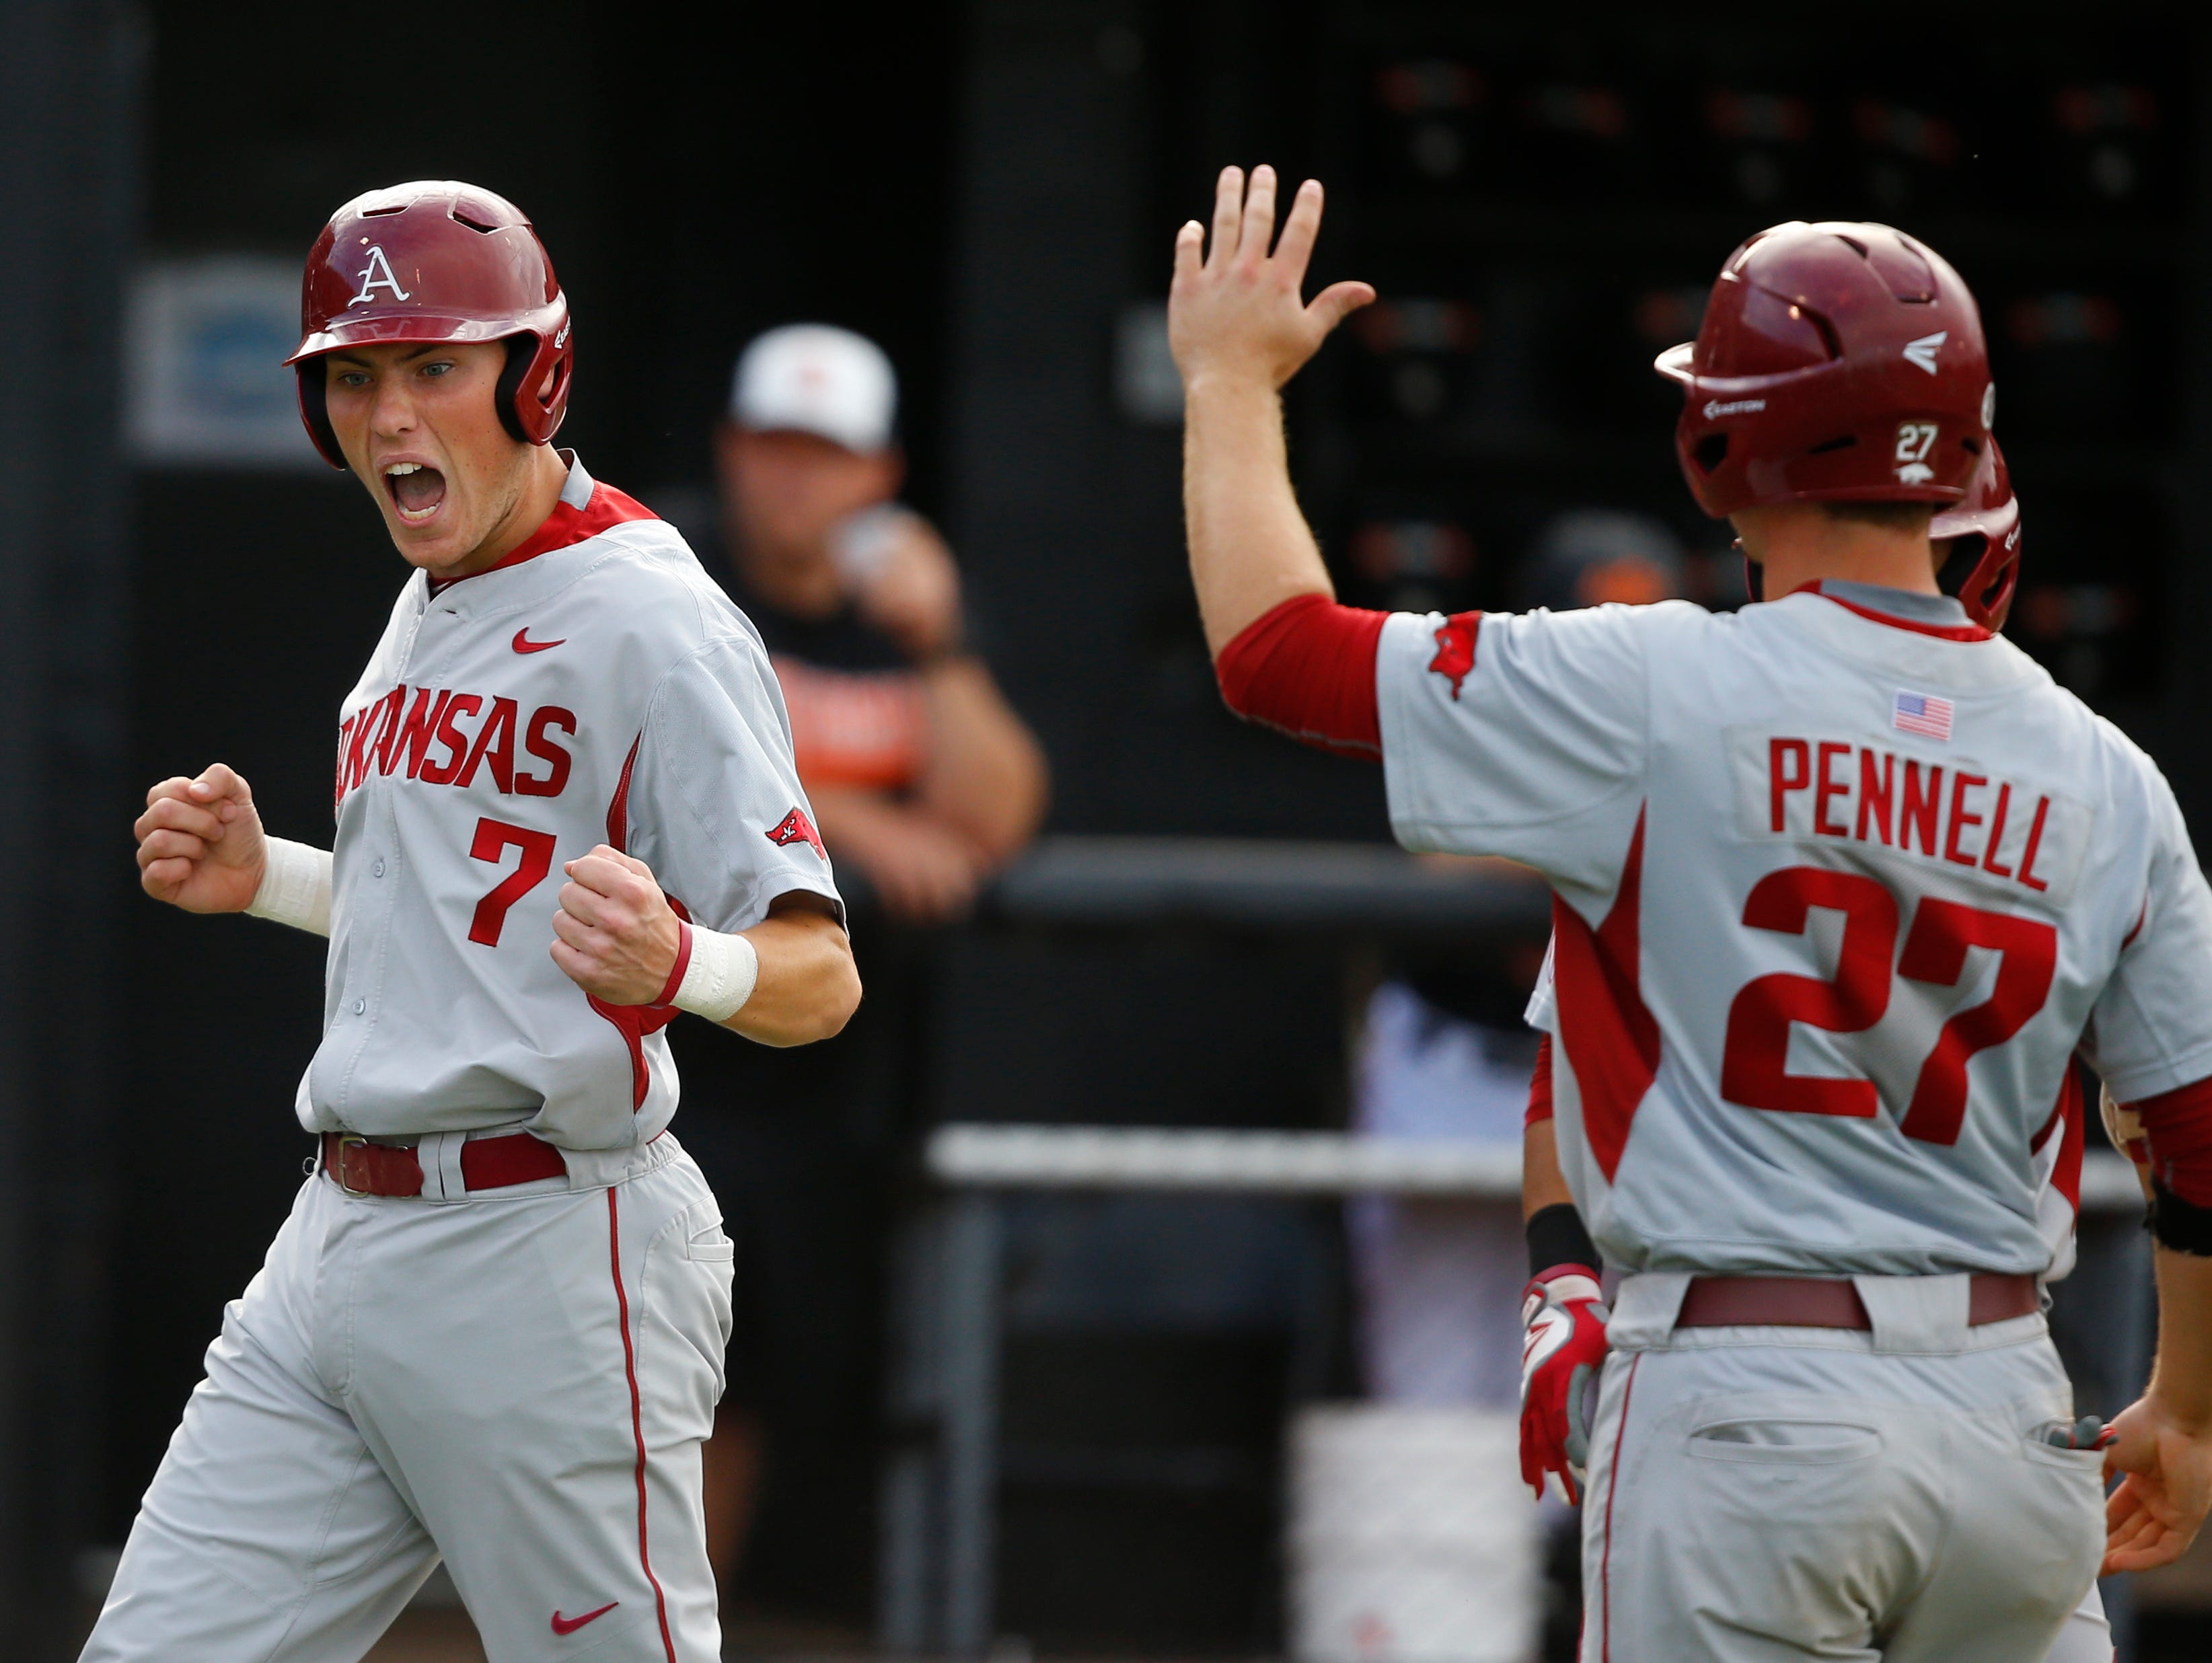 Arkansas' Bobby Wernes (7) and Tucker Pennell (27) celebrate after Wernes scored on a hit by Tyler Spoon in the third inning against Oklahoma State during action at the Stillwater Regional on Saturday night. The Razorbacks rallied for a 7-5 win.